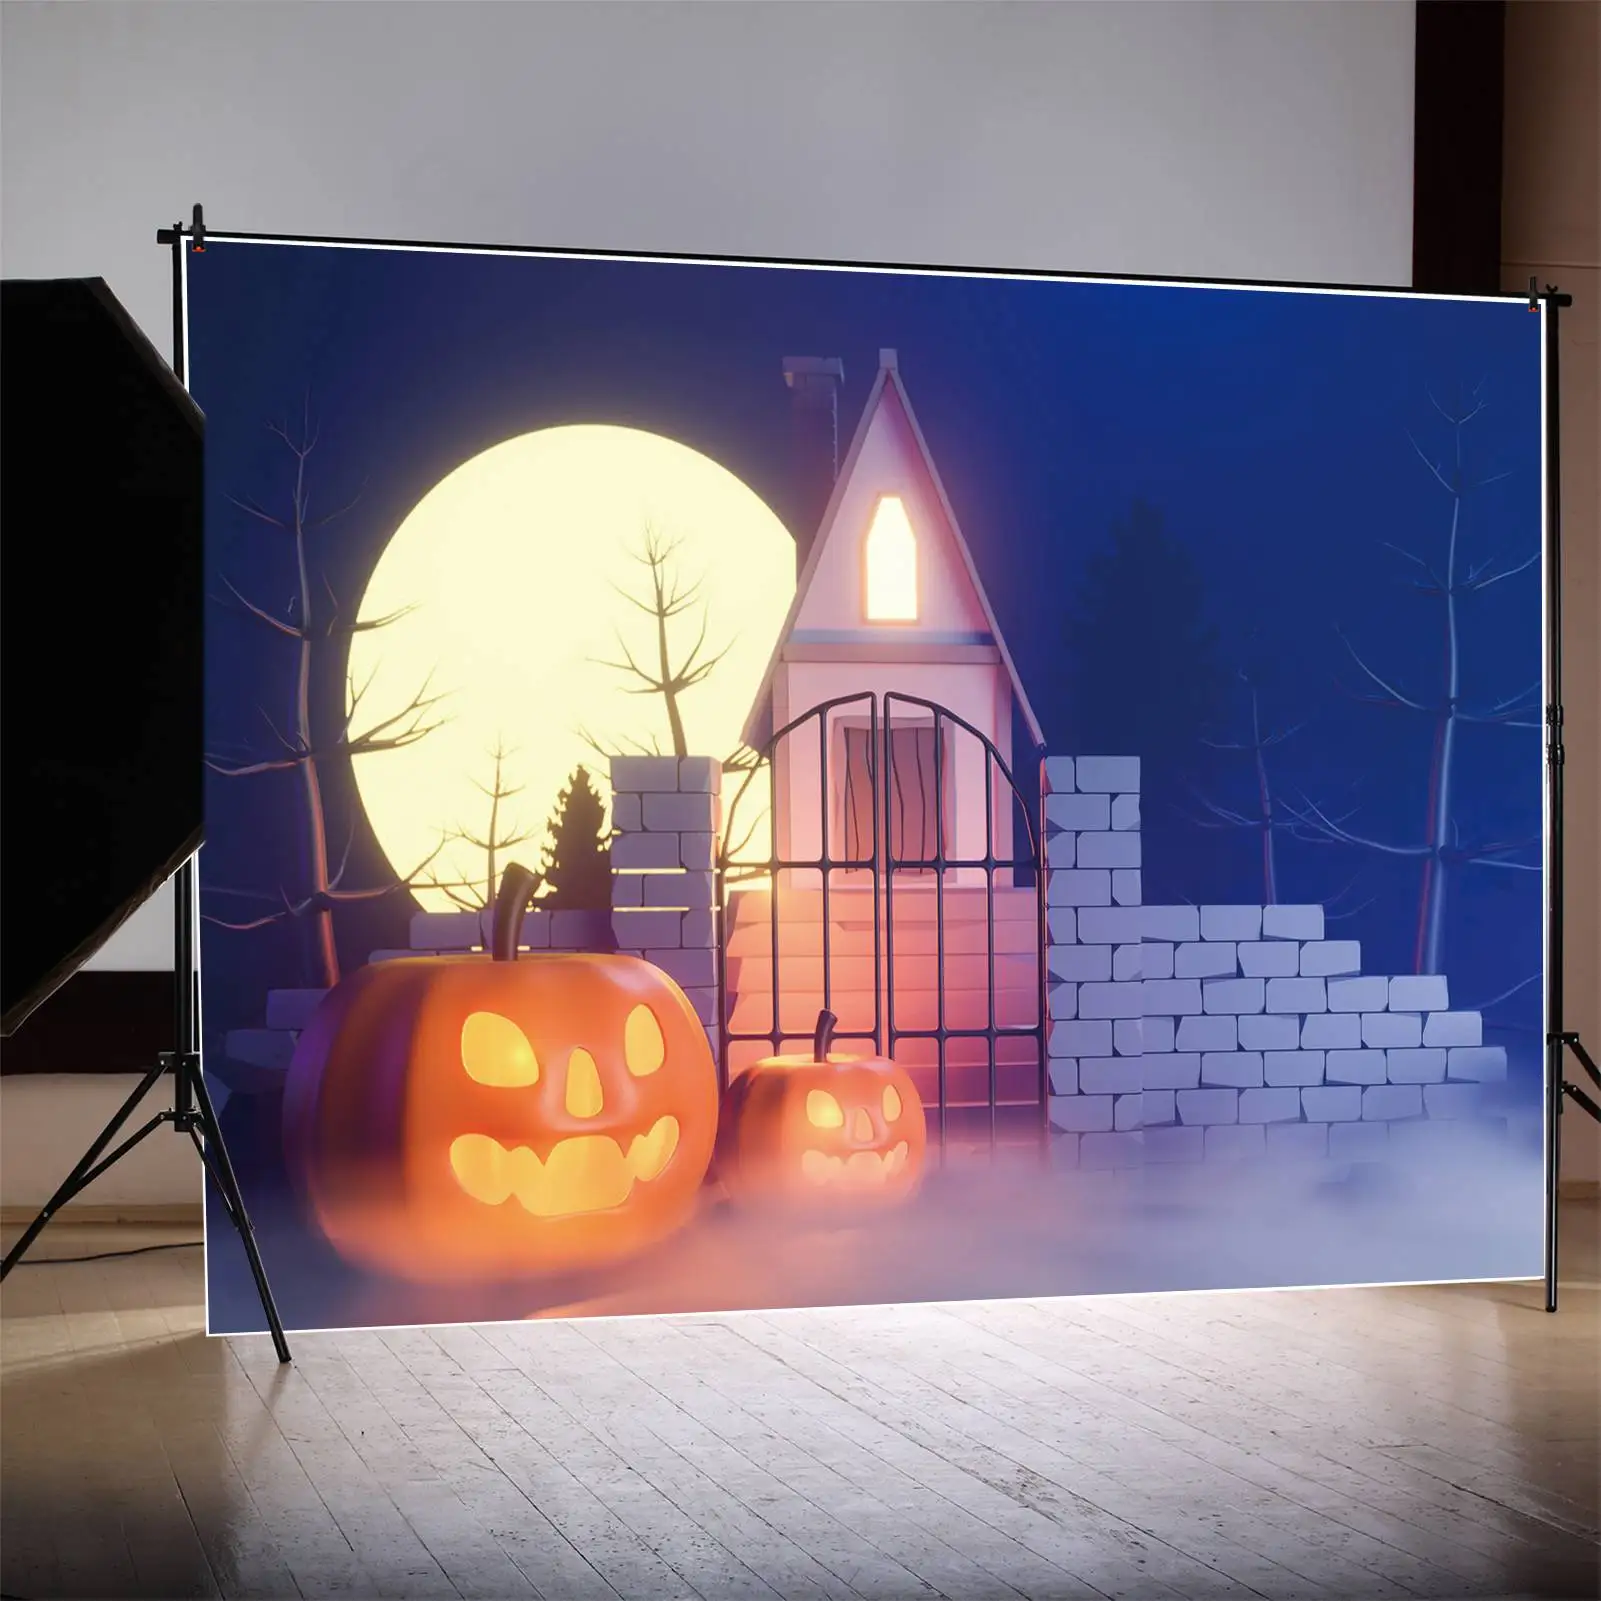 

MOON.QG Backdrop Blue Halloween Baby Party Photo Booth Props Background Children Cabin Porch Pumpkin Lamp Moon Light Decorations